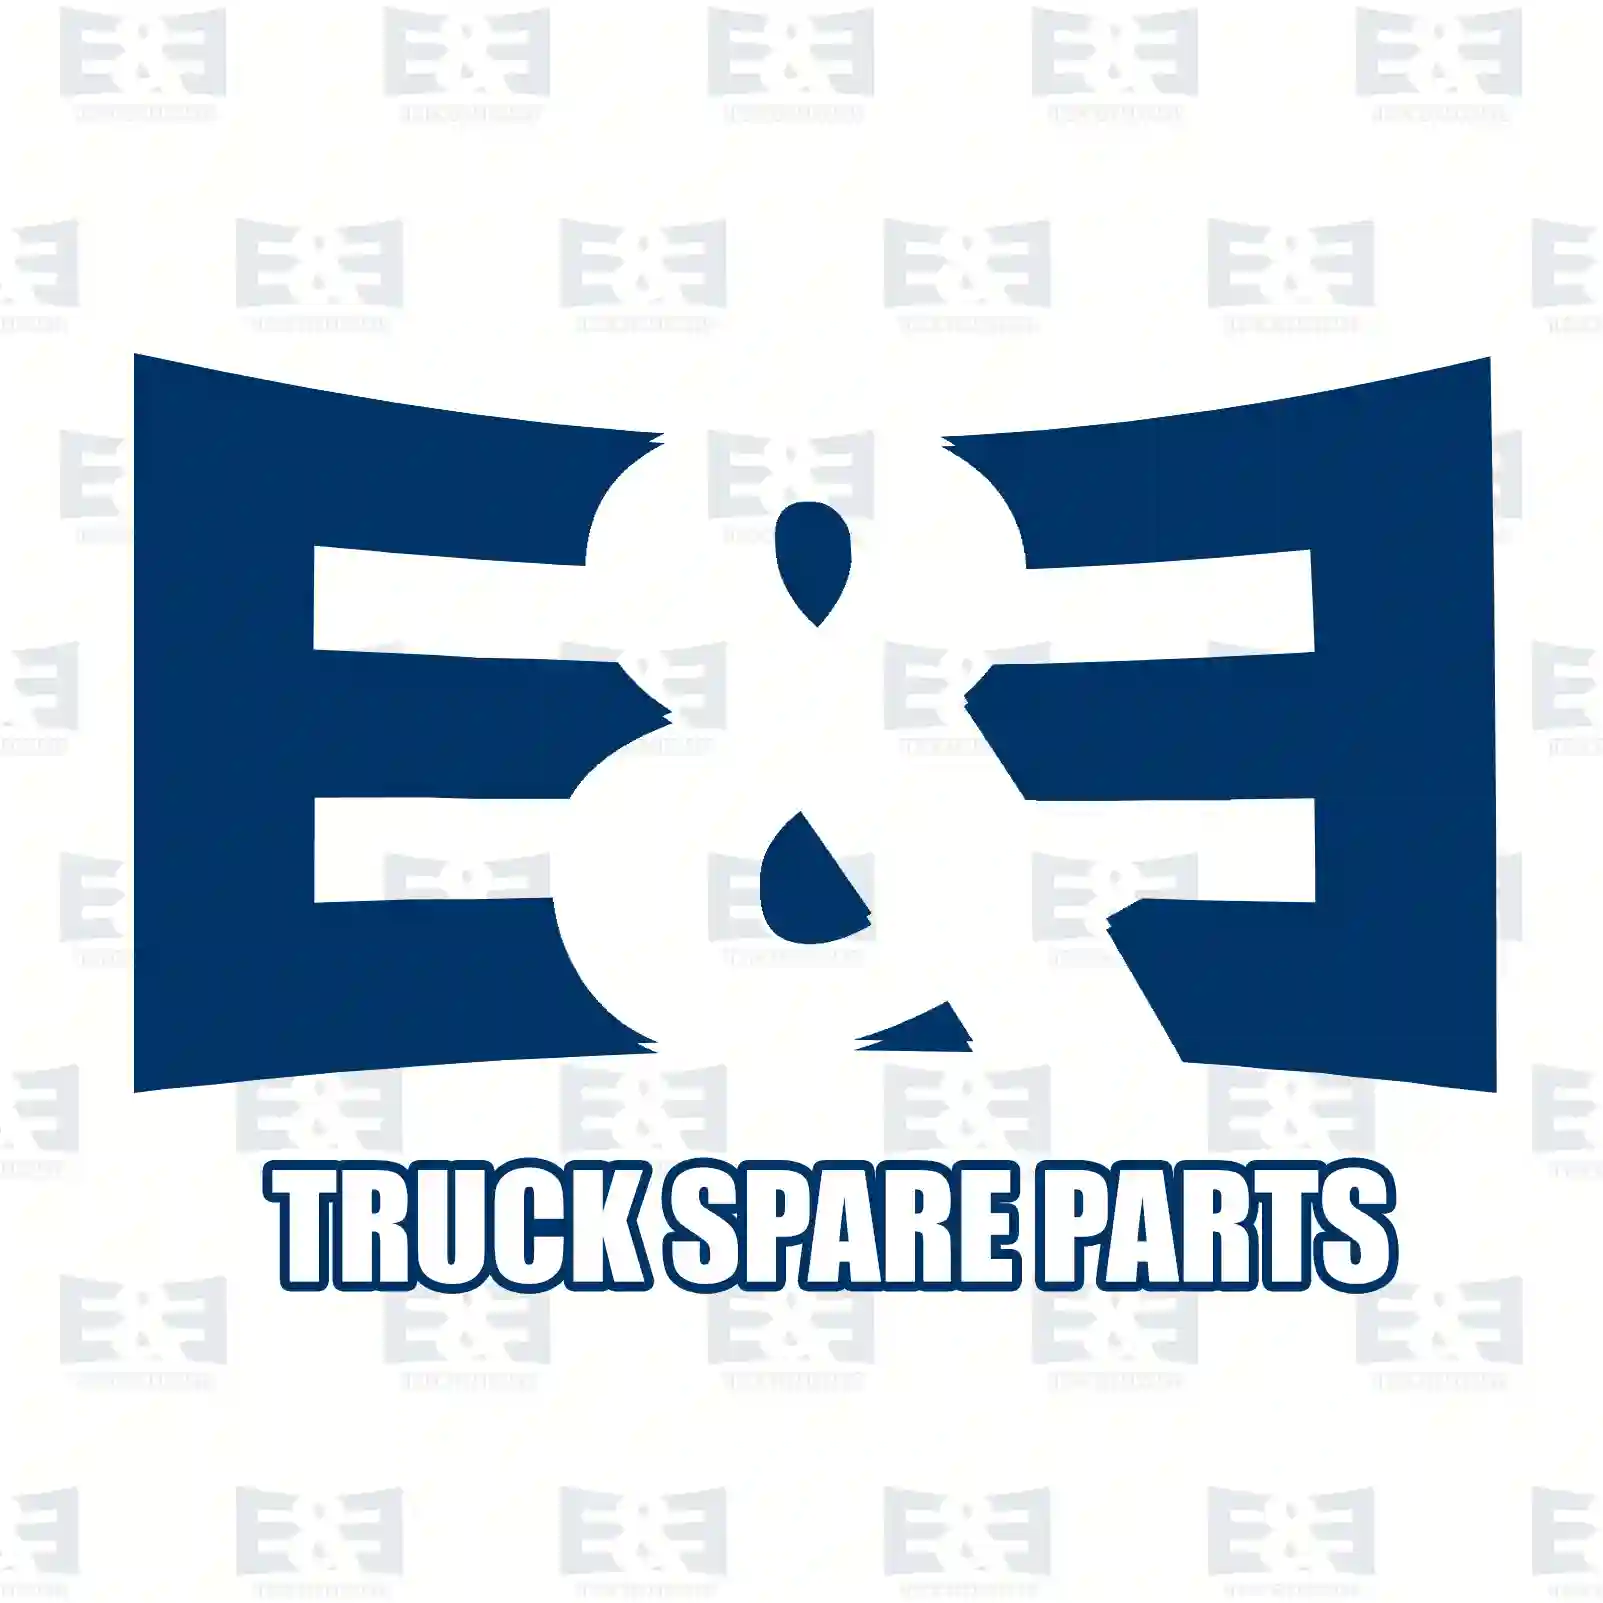  Thrust washer kit || E&E Truck Spare Parts | Truck Spare Parts, Auotomotive Spare Parts